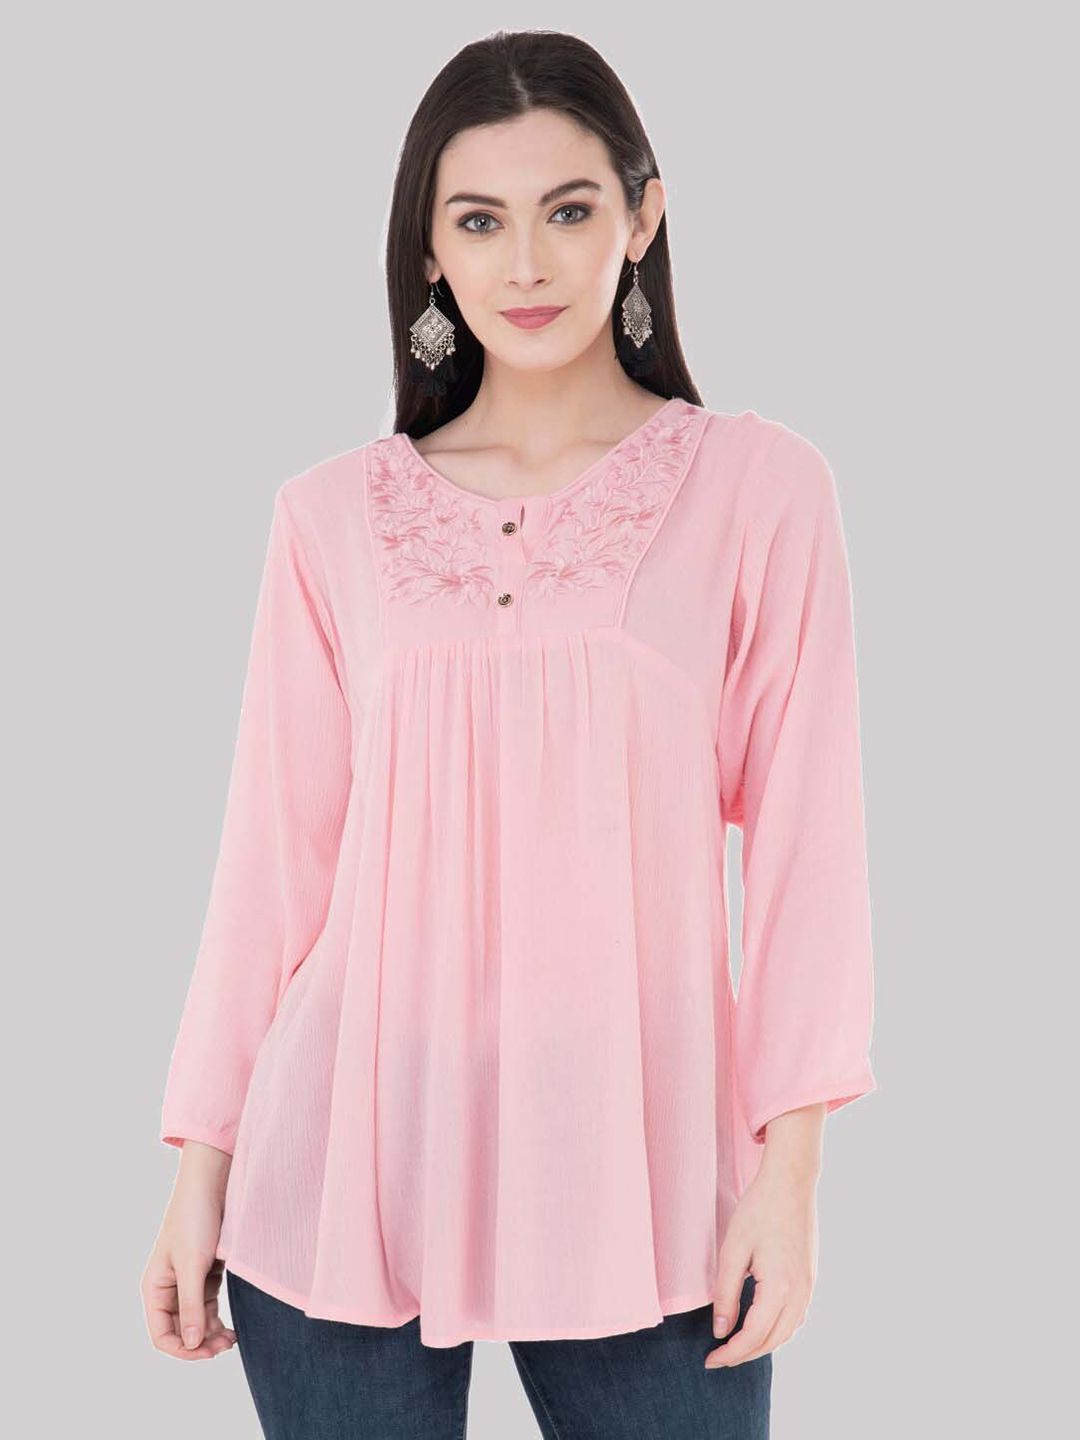 SAAKAA Pink Solid Casual A-Line Top Price in India